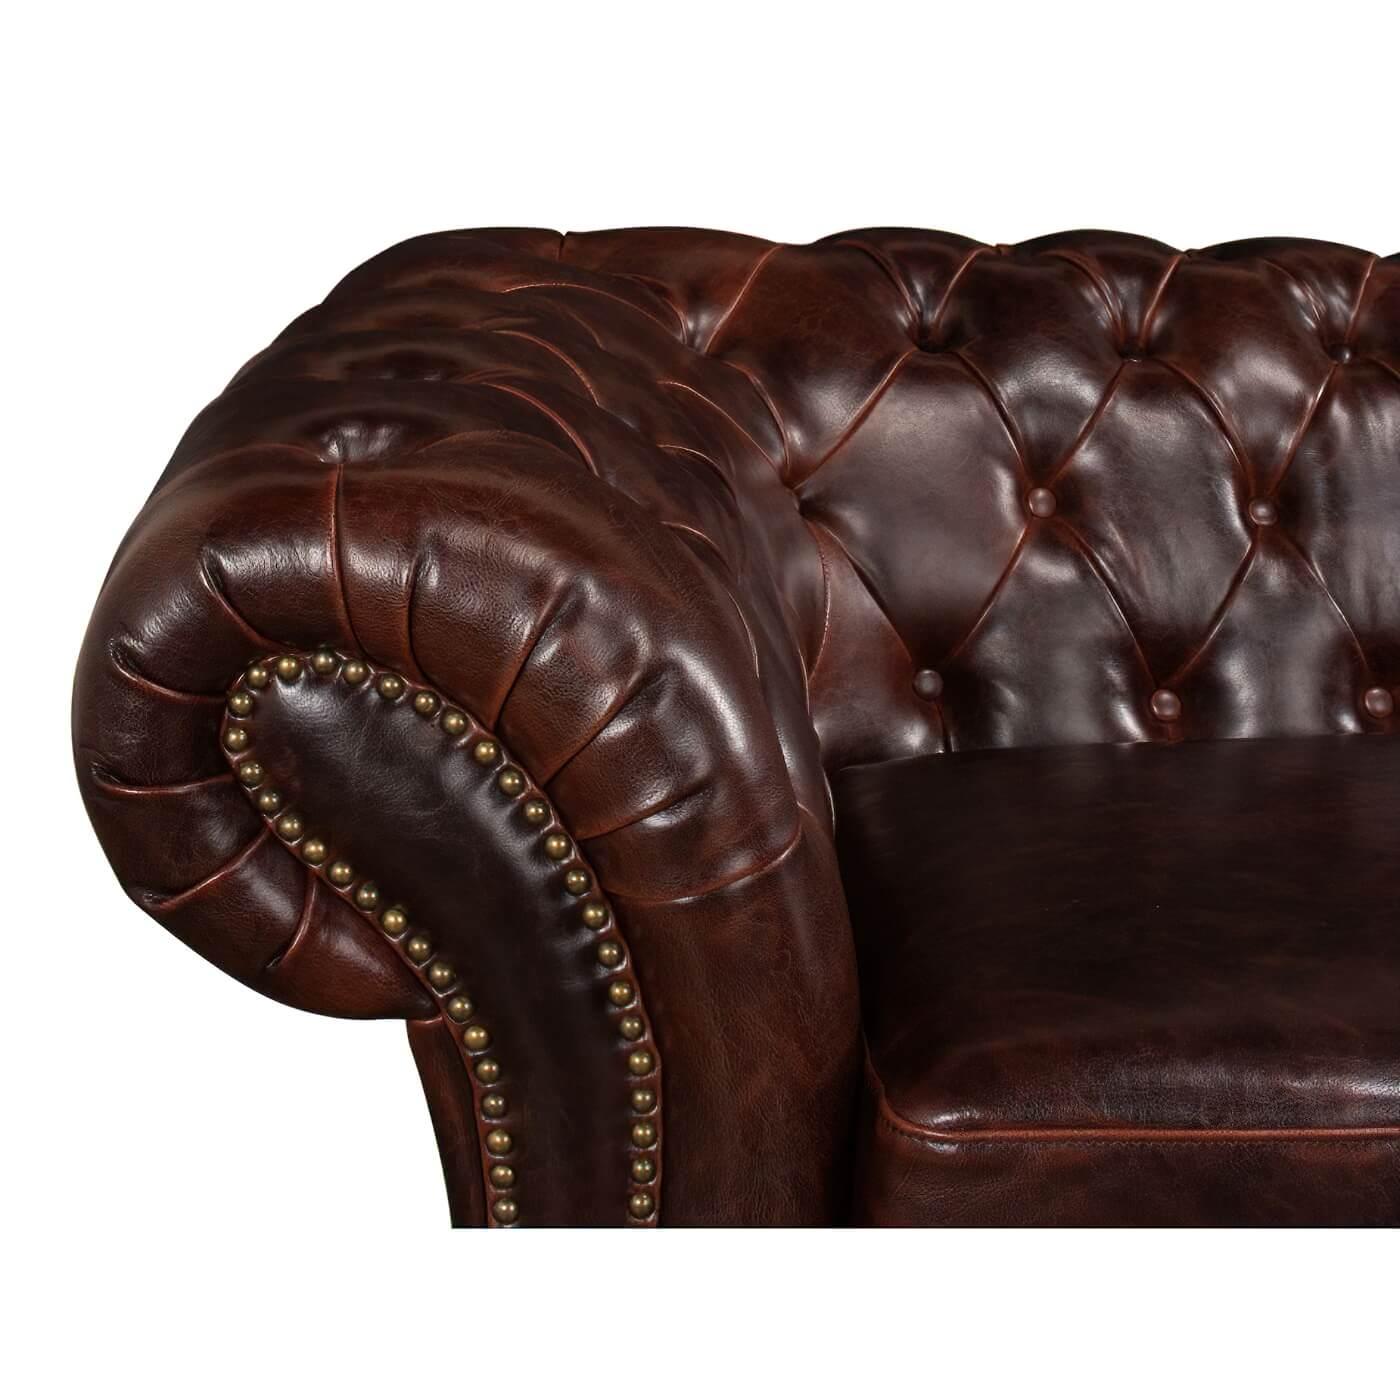 Tufted Leather Chesterfield Sofa For Sale 2